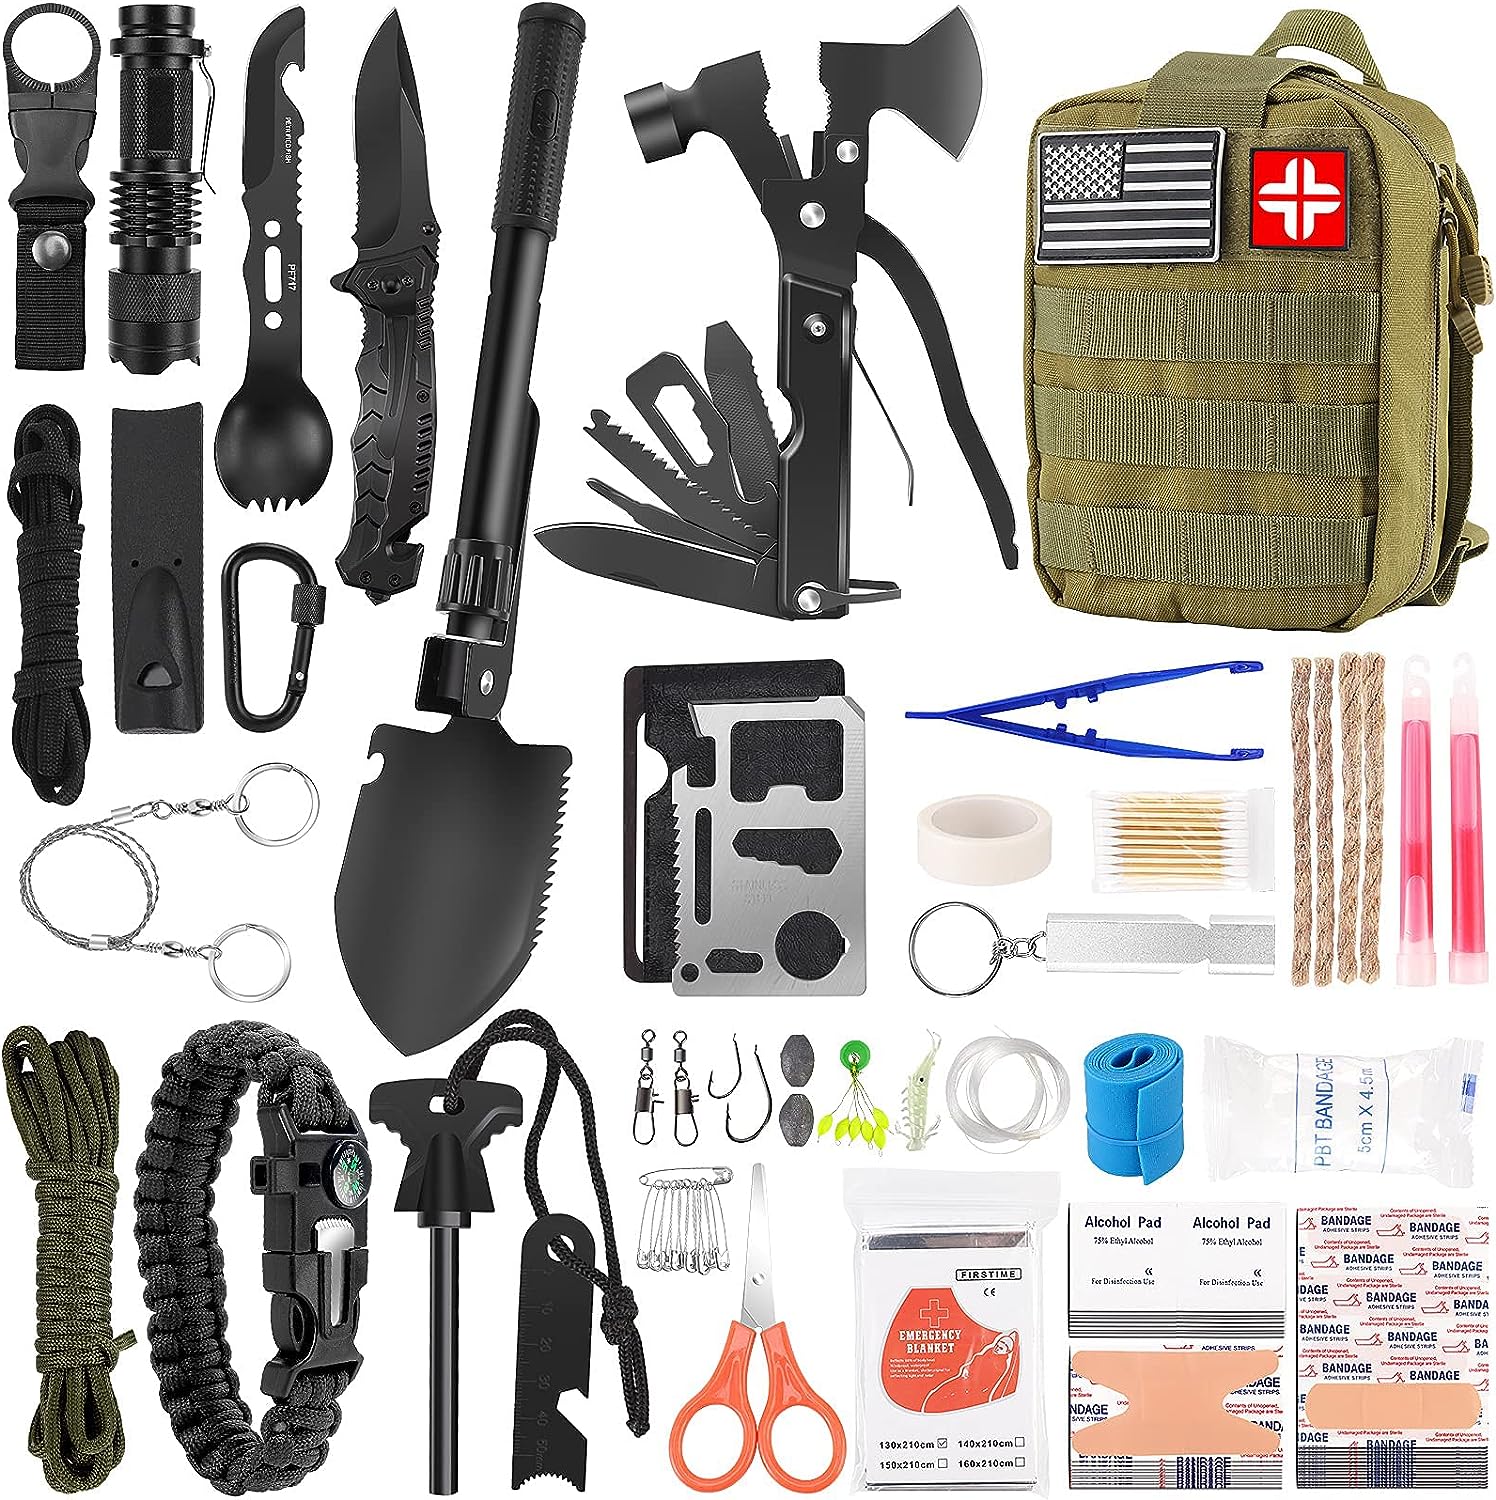 Professional Survival Gear and First Aid Kit - 142Pcs 